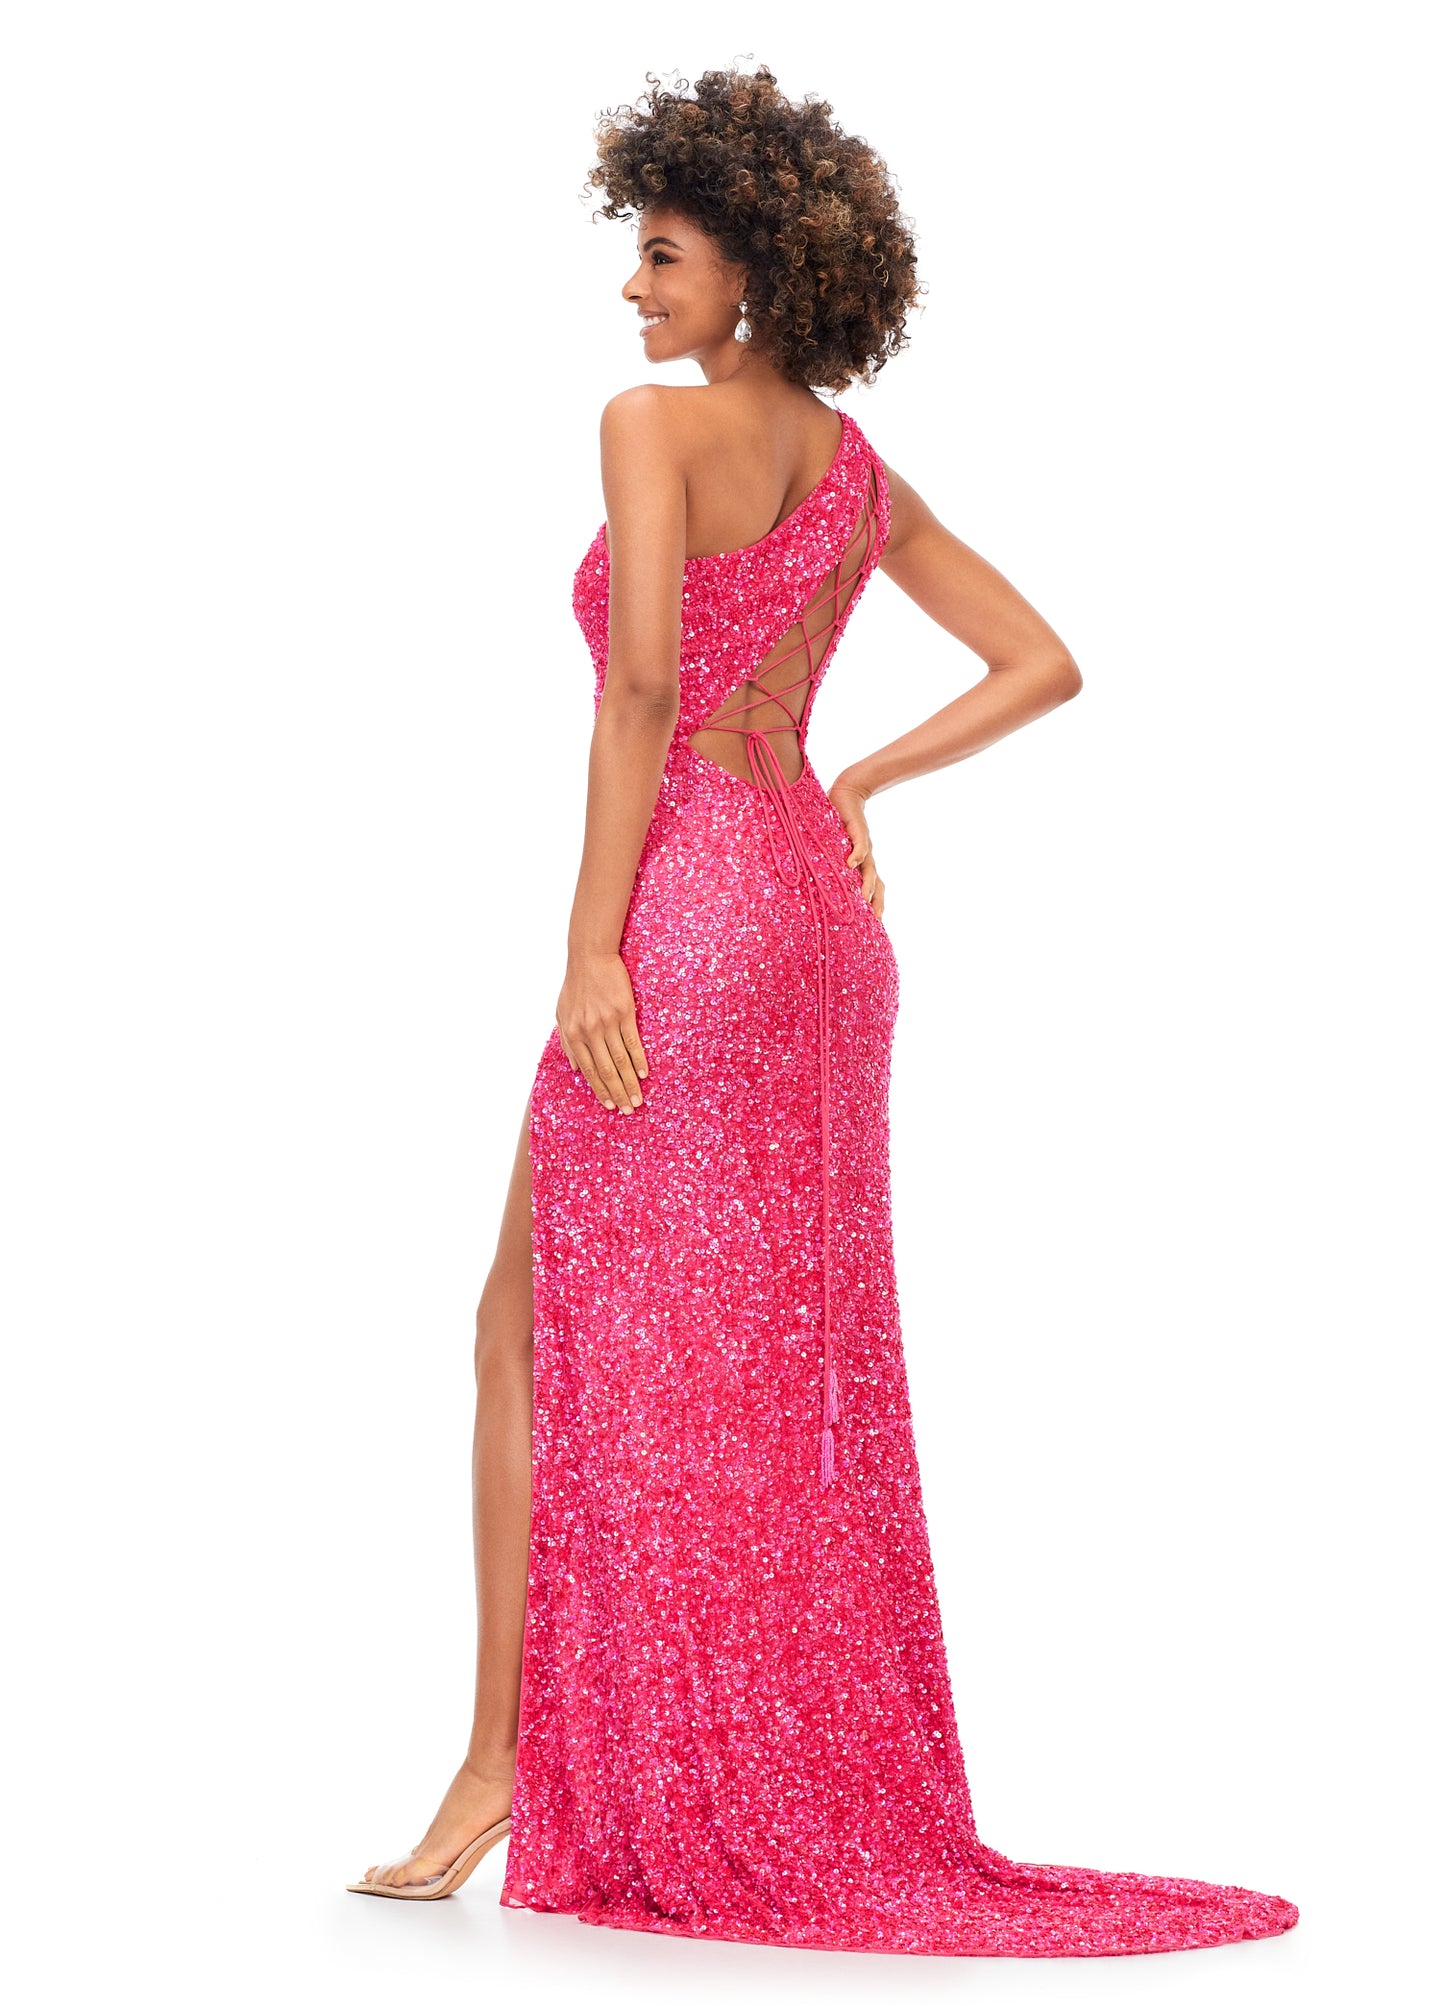 Ashley Lauren 11144 Electric Orchid Long Sequin One Shoulder Prom Dress with Lace up Back  Dazzle the night away in this one shoulder sequin gown featuring an asymmetrical lace up back and left leg slit.